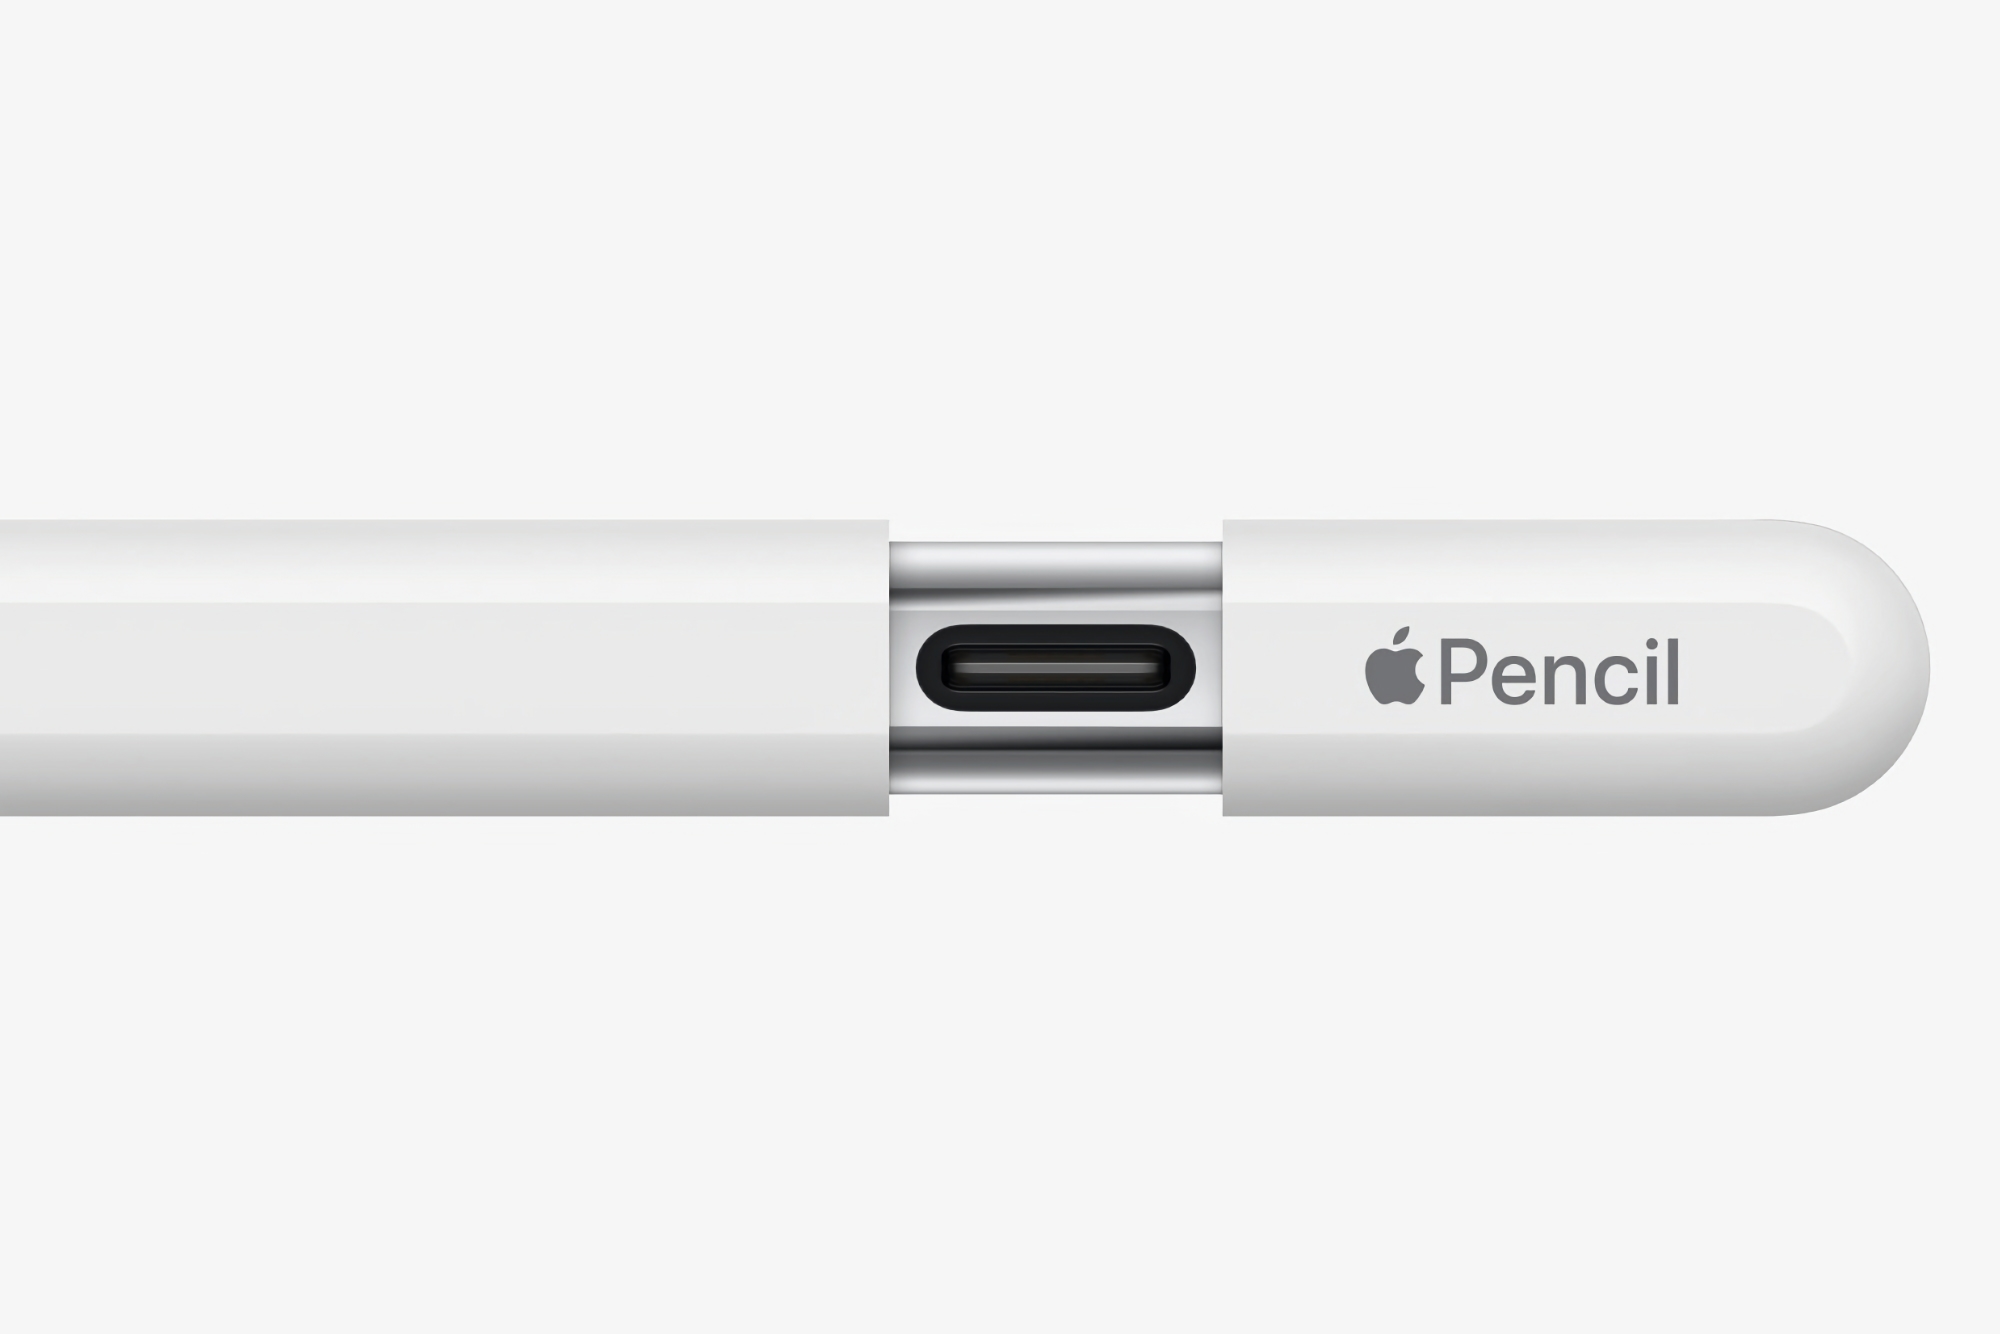 Save up to 15 per cent: Apple has started selling refurbished Pencil with USB-C